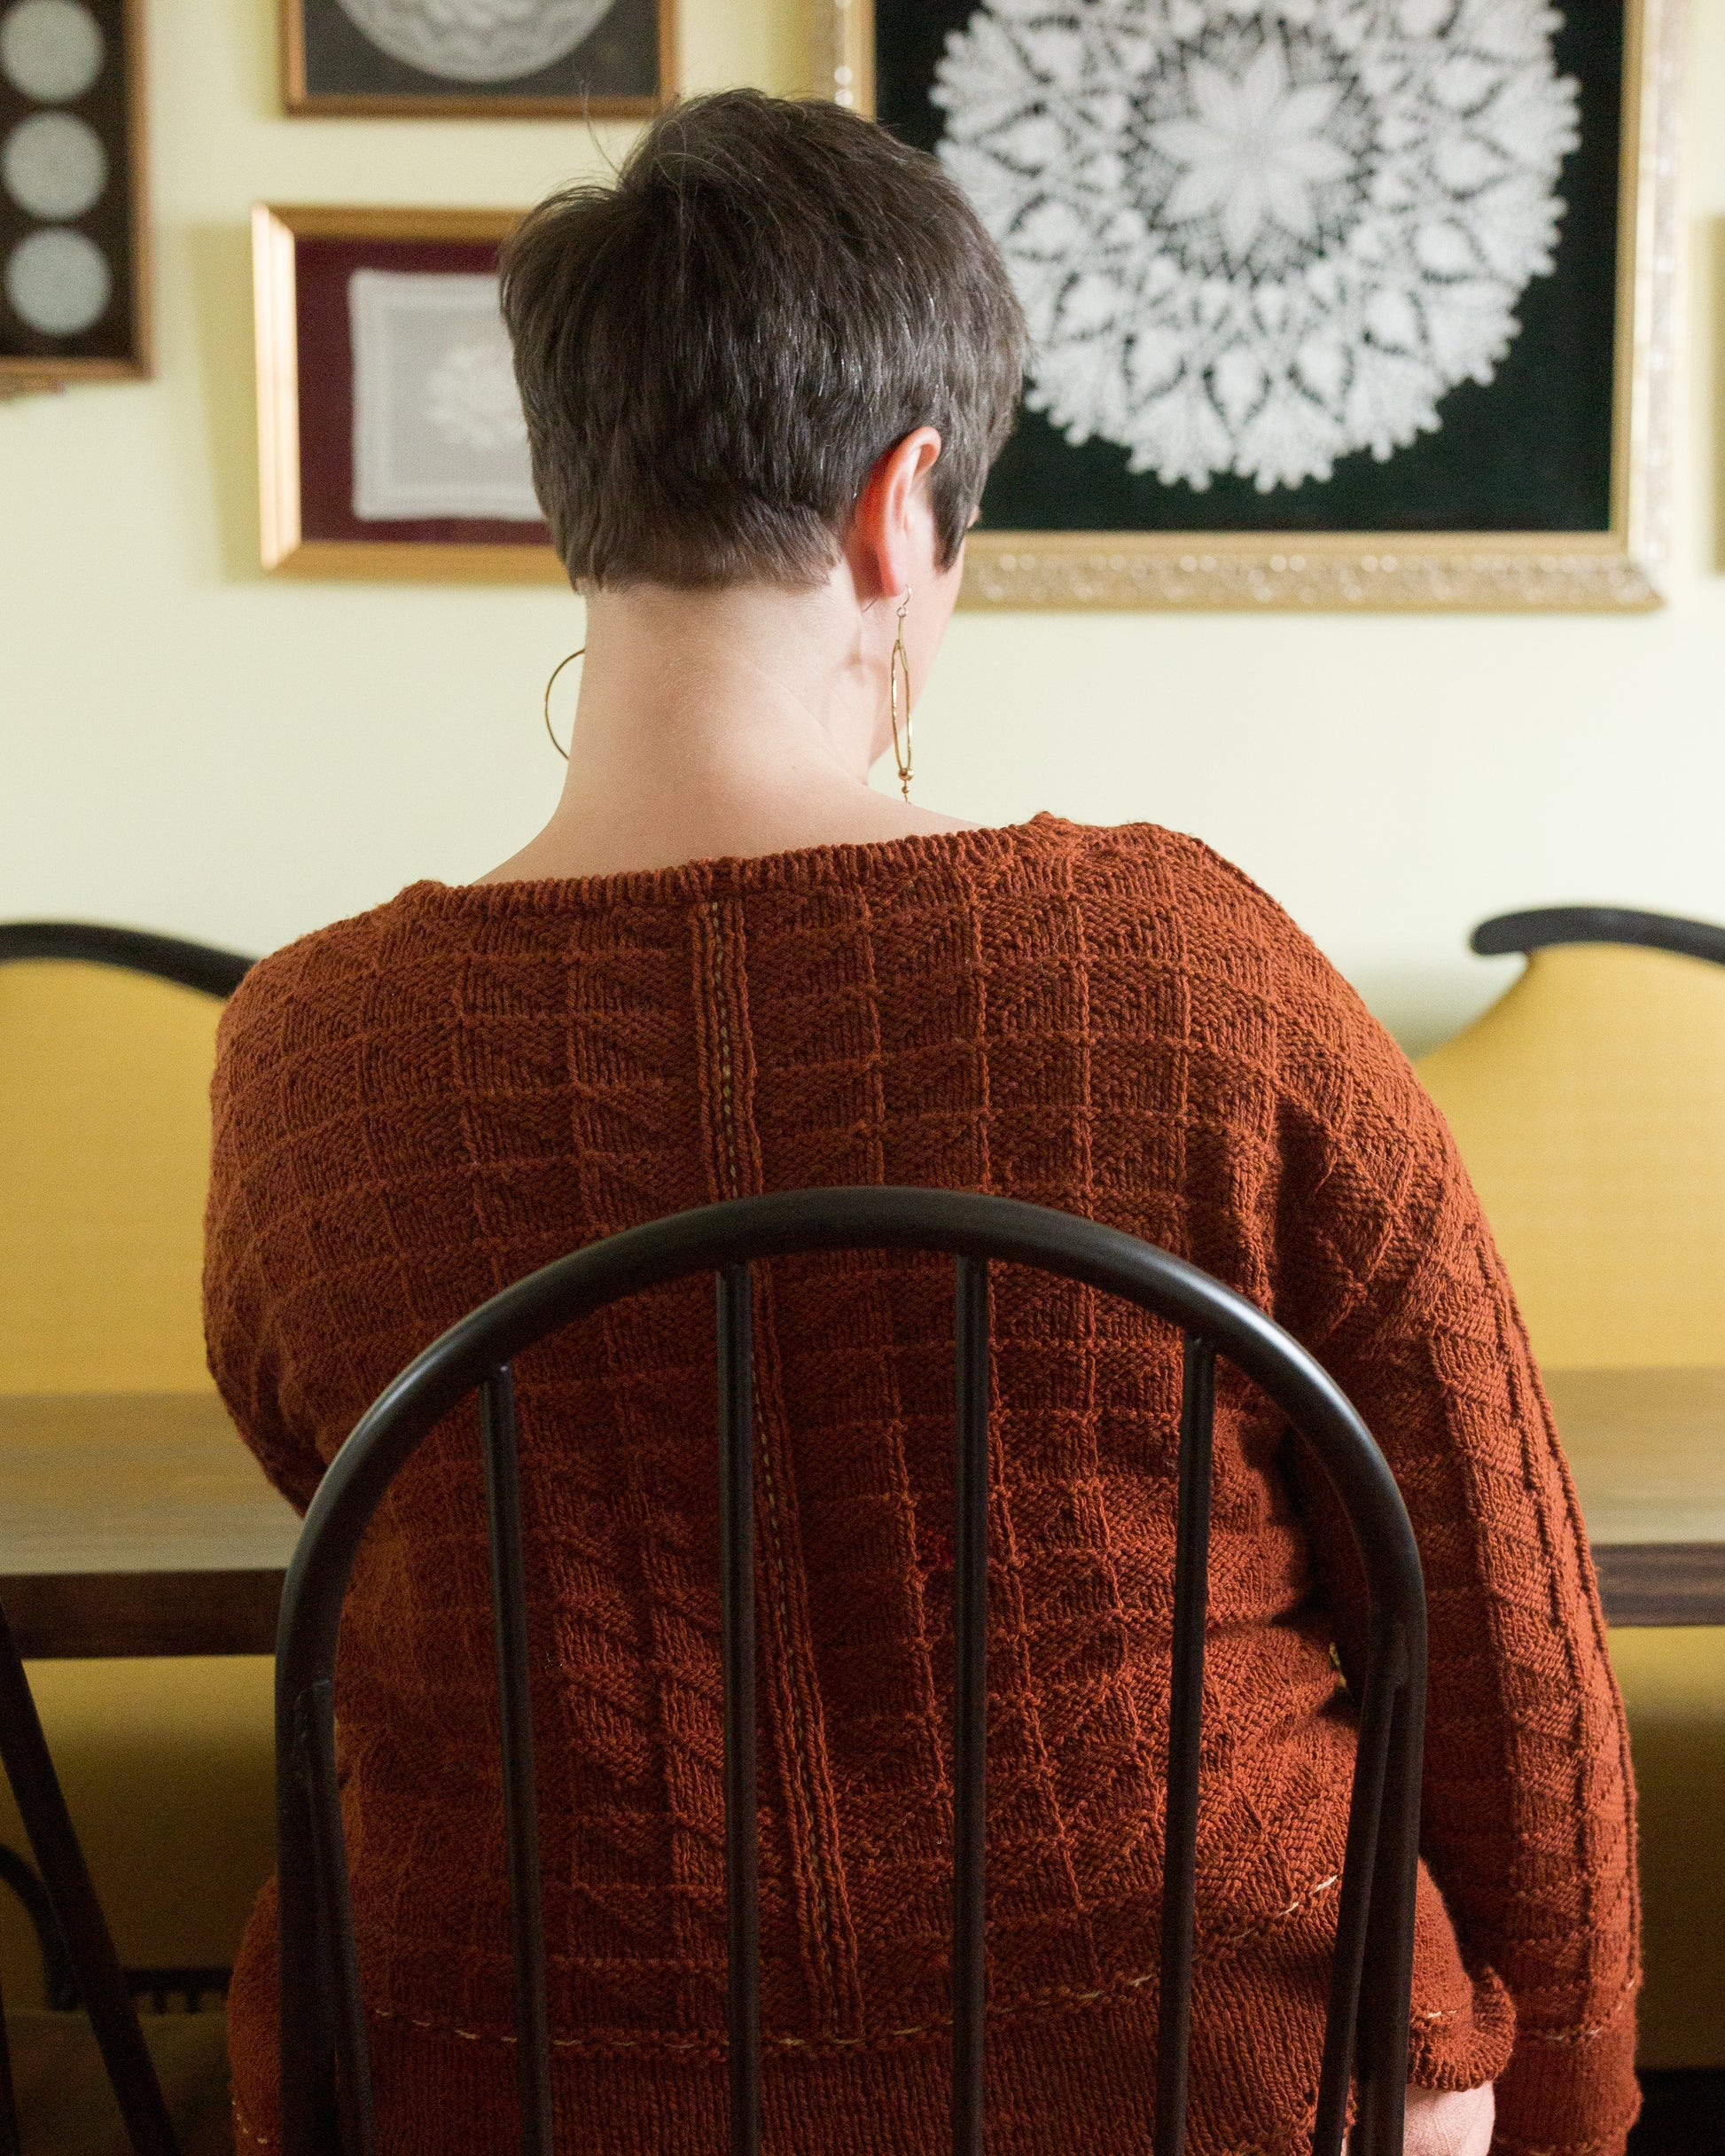 Seen from behind, Jen wears a knit pullover, made from brick orange yarn. The pullover features a allover quilt stitch design and a contrasting running stitch line down the back.